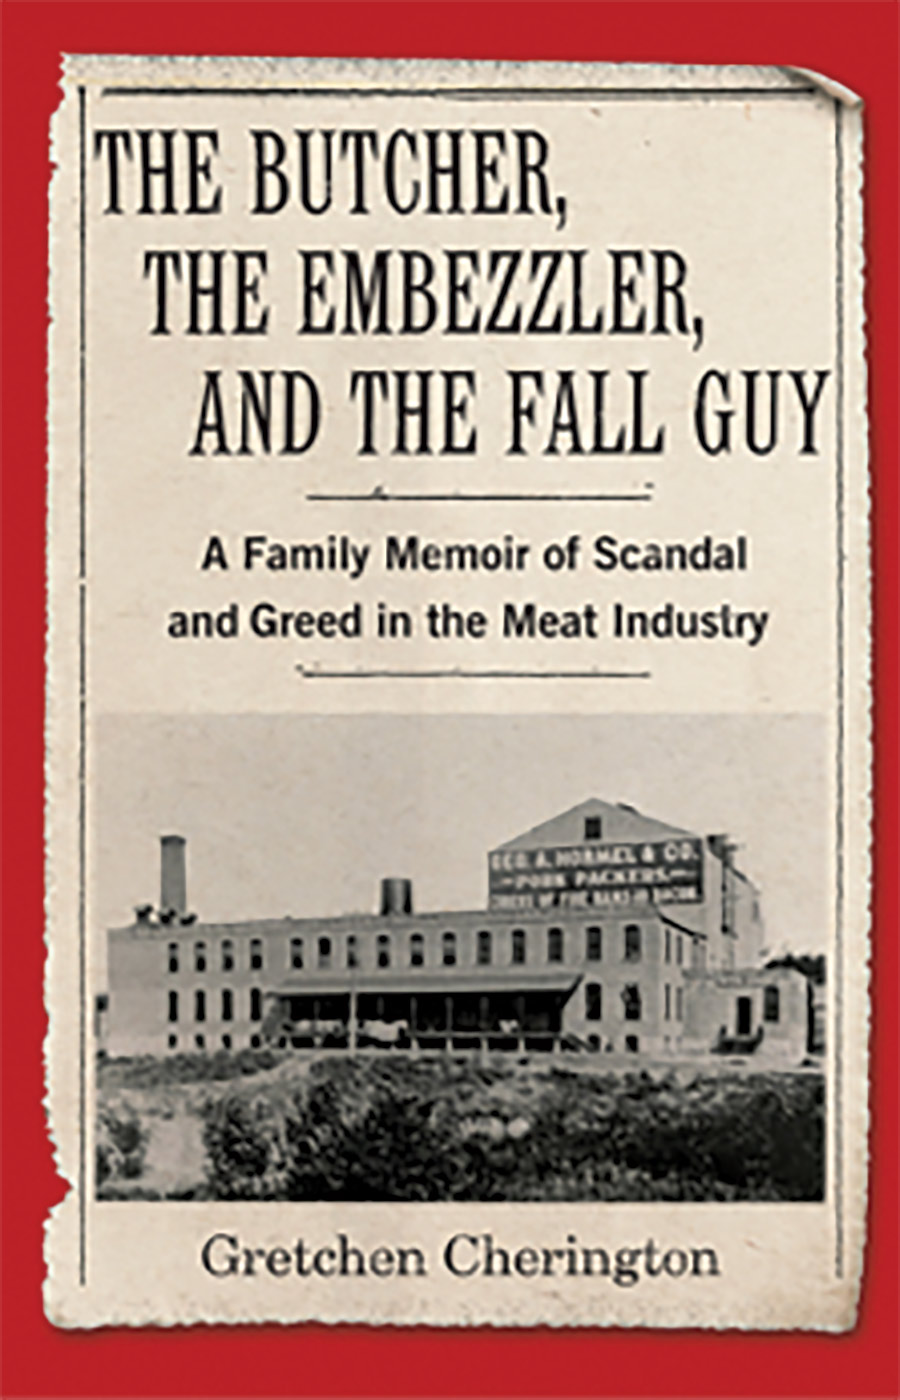 Front book cover of The Butcher, The Embezzler, and The Fall Guy by Gretchen Cherington